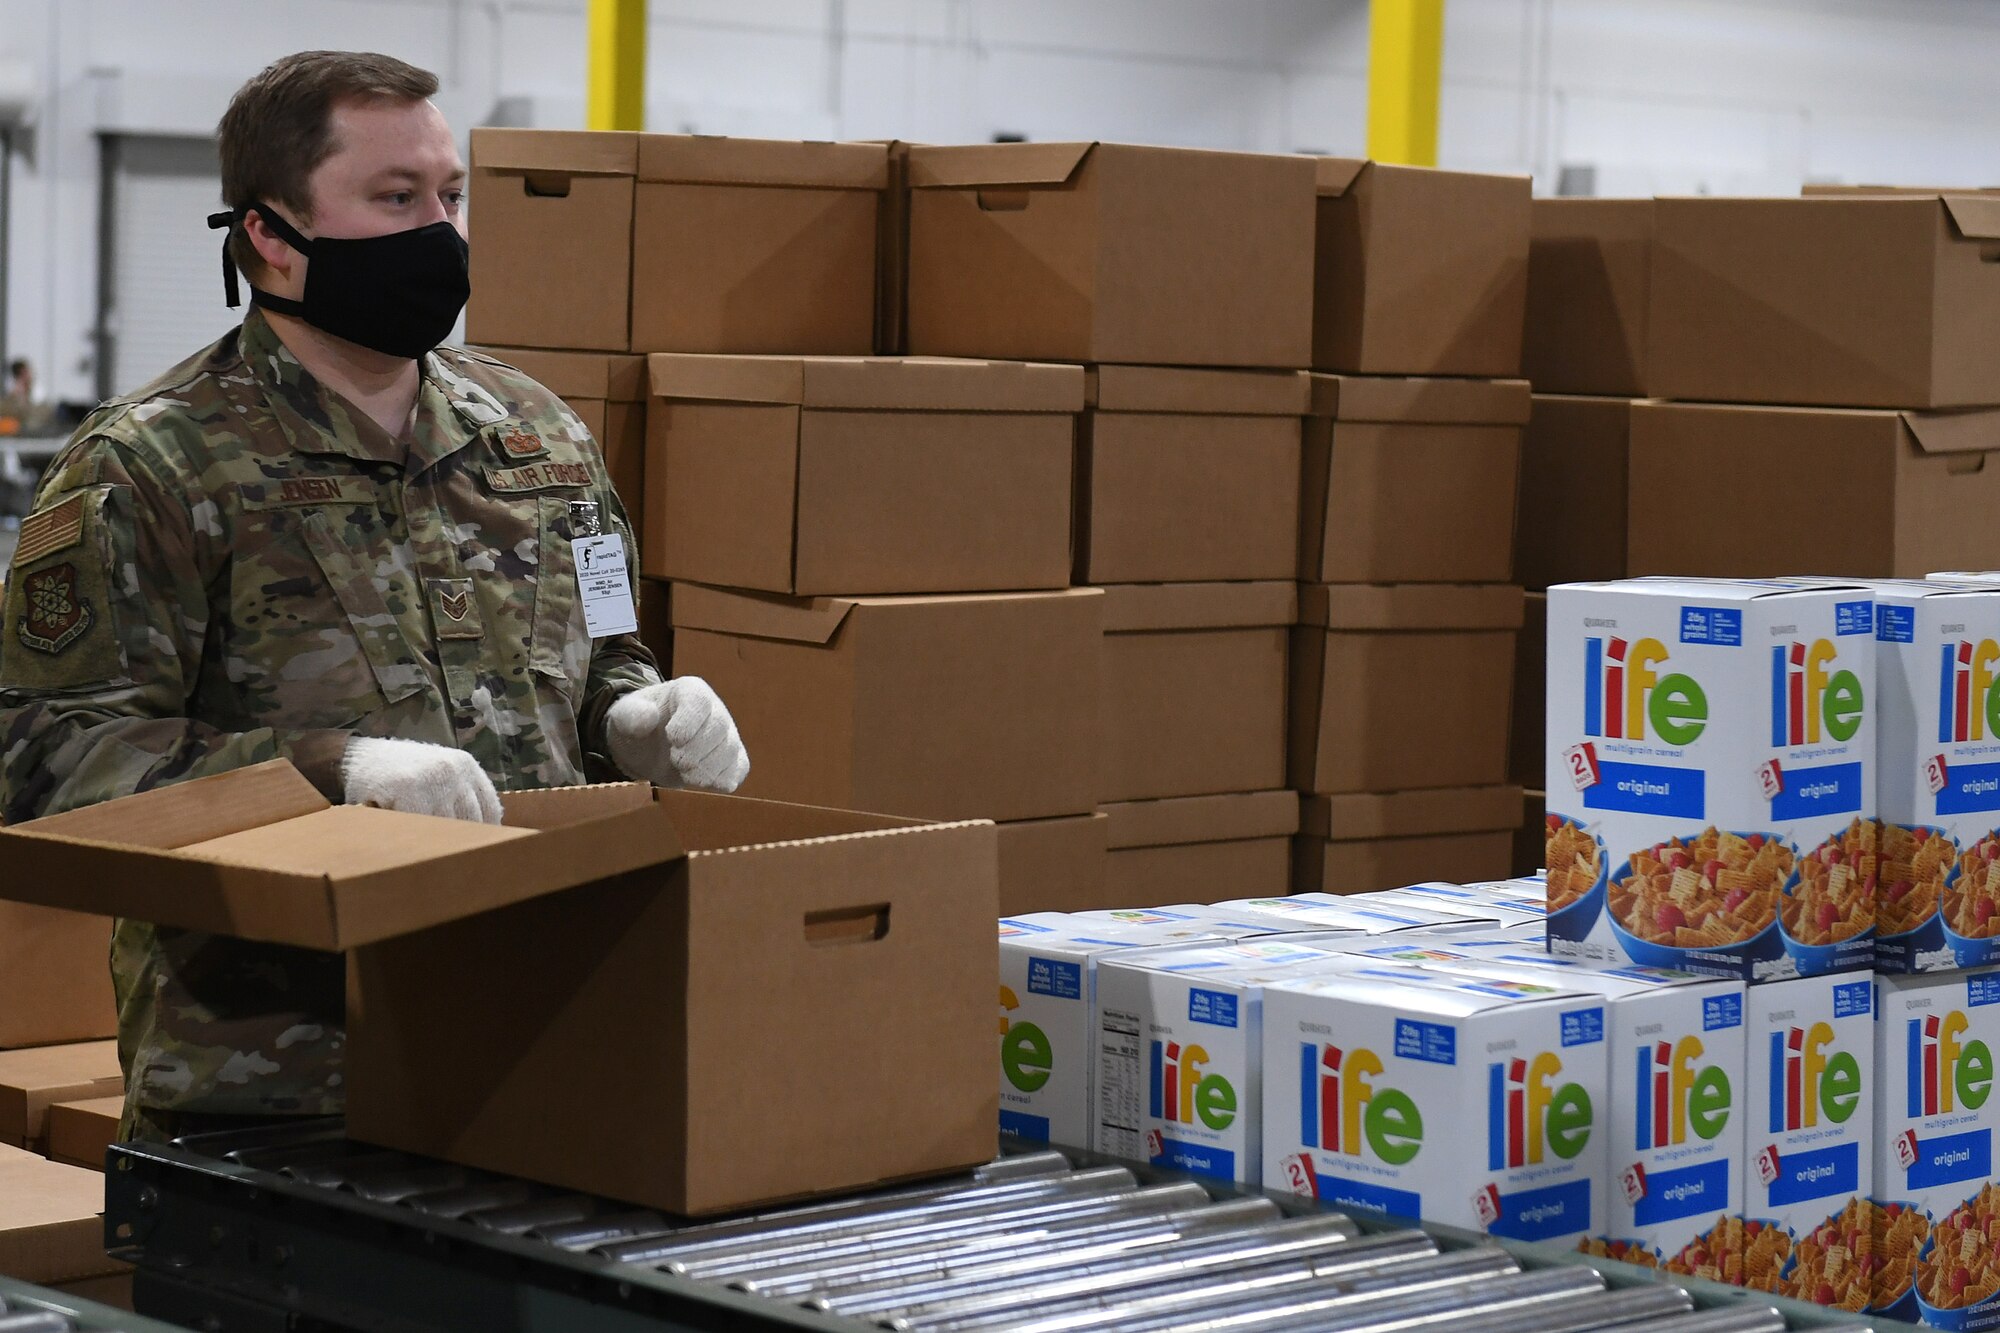 U.S. Air Force Staff Sgt. Jeremiah Jensen, assigned to the 225th Air Defense Squadron, prepares food boxes at the Food Lifeline COVID Response warehouse April 23, 2020 in Seattle, Washington.  More than 250 Air and National Guardsmen are assigned to the warehouse where they are able to prepare, on average, 268 boxes an hour per line. (U.S. Air National Guard photo by Master Sgt. Tim Chacon)